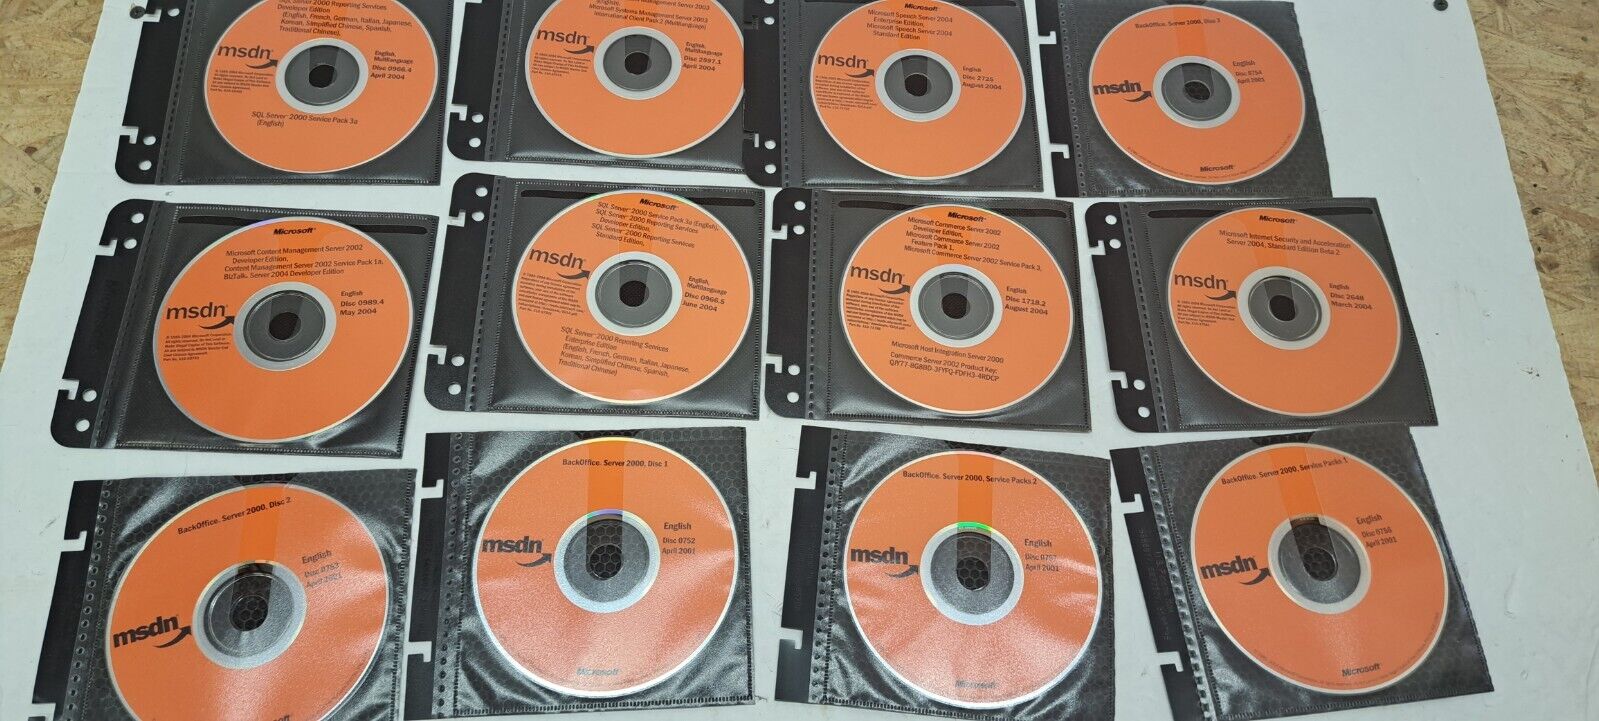 Microsoft MSDN 2004 disk lot see pics for titles 8/2 L15